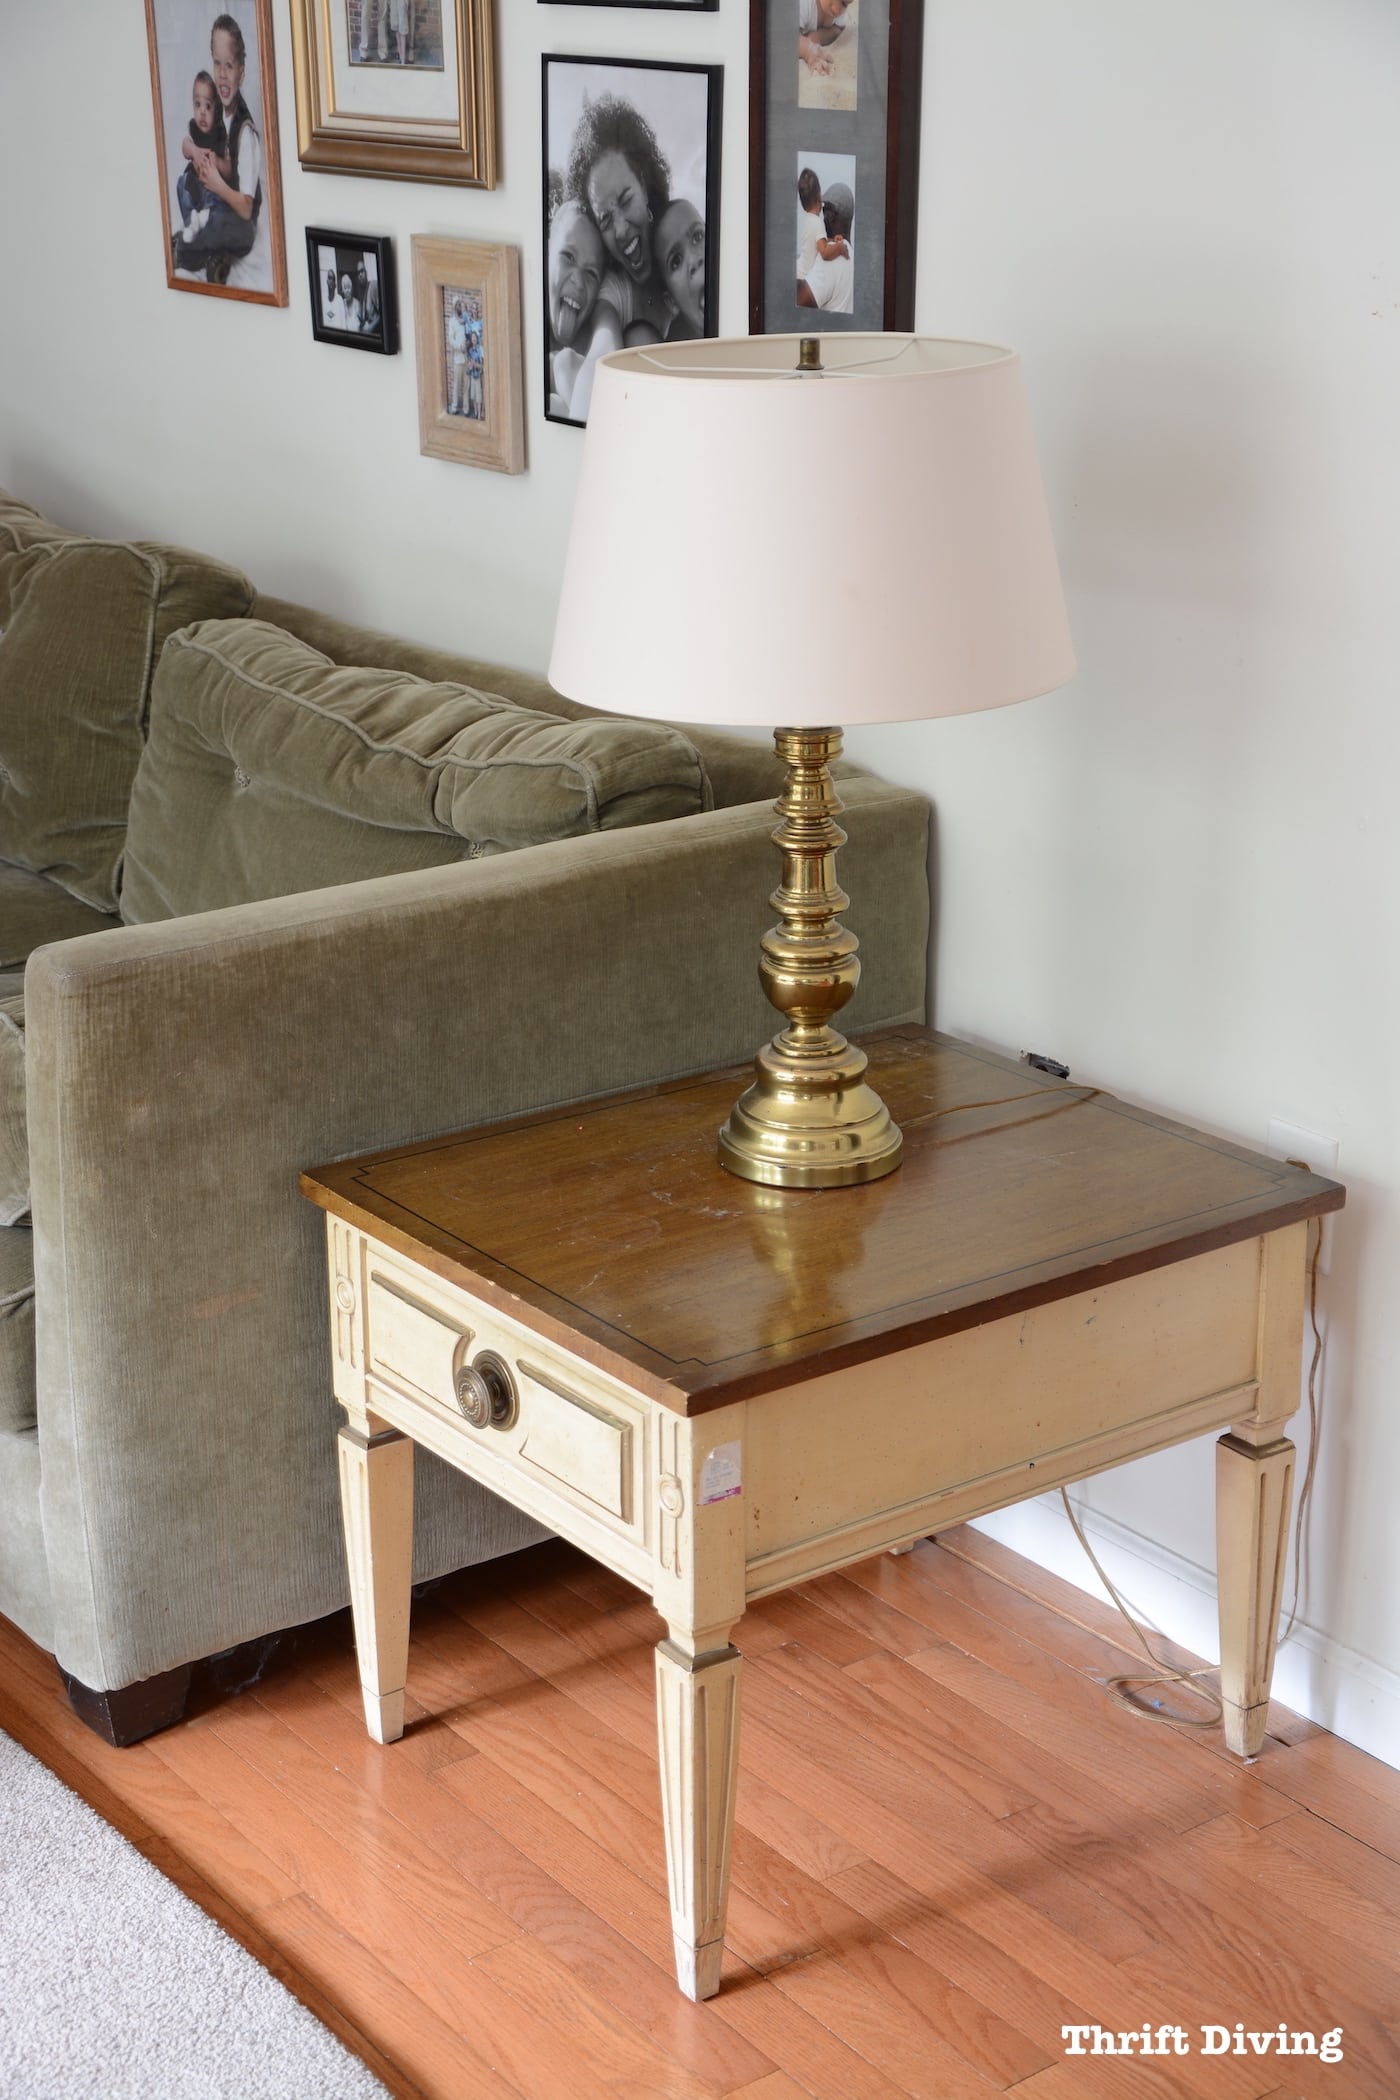 Thrifted End Table and Lamp Makeover - BEFORE - Thrift Diving